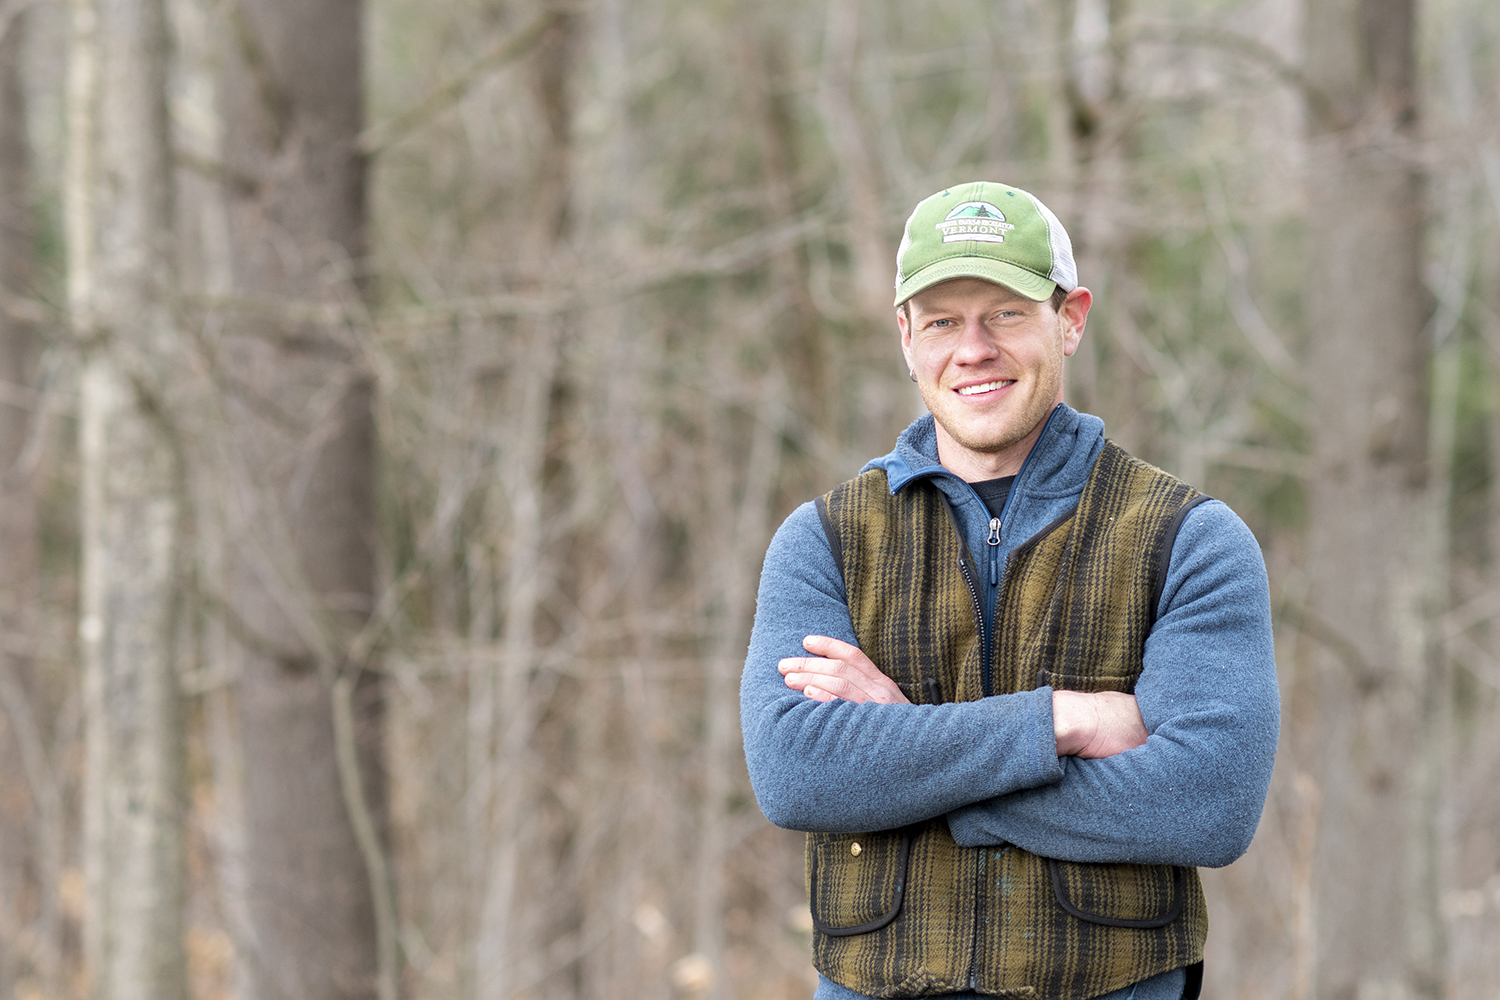 Town Forests Bring Vermonters Together, Even While Social Distancing